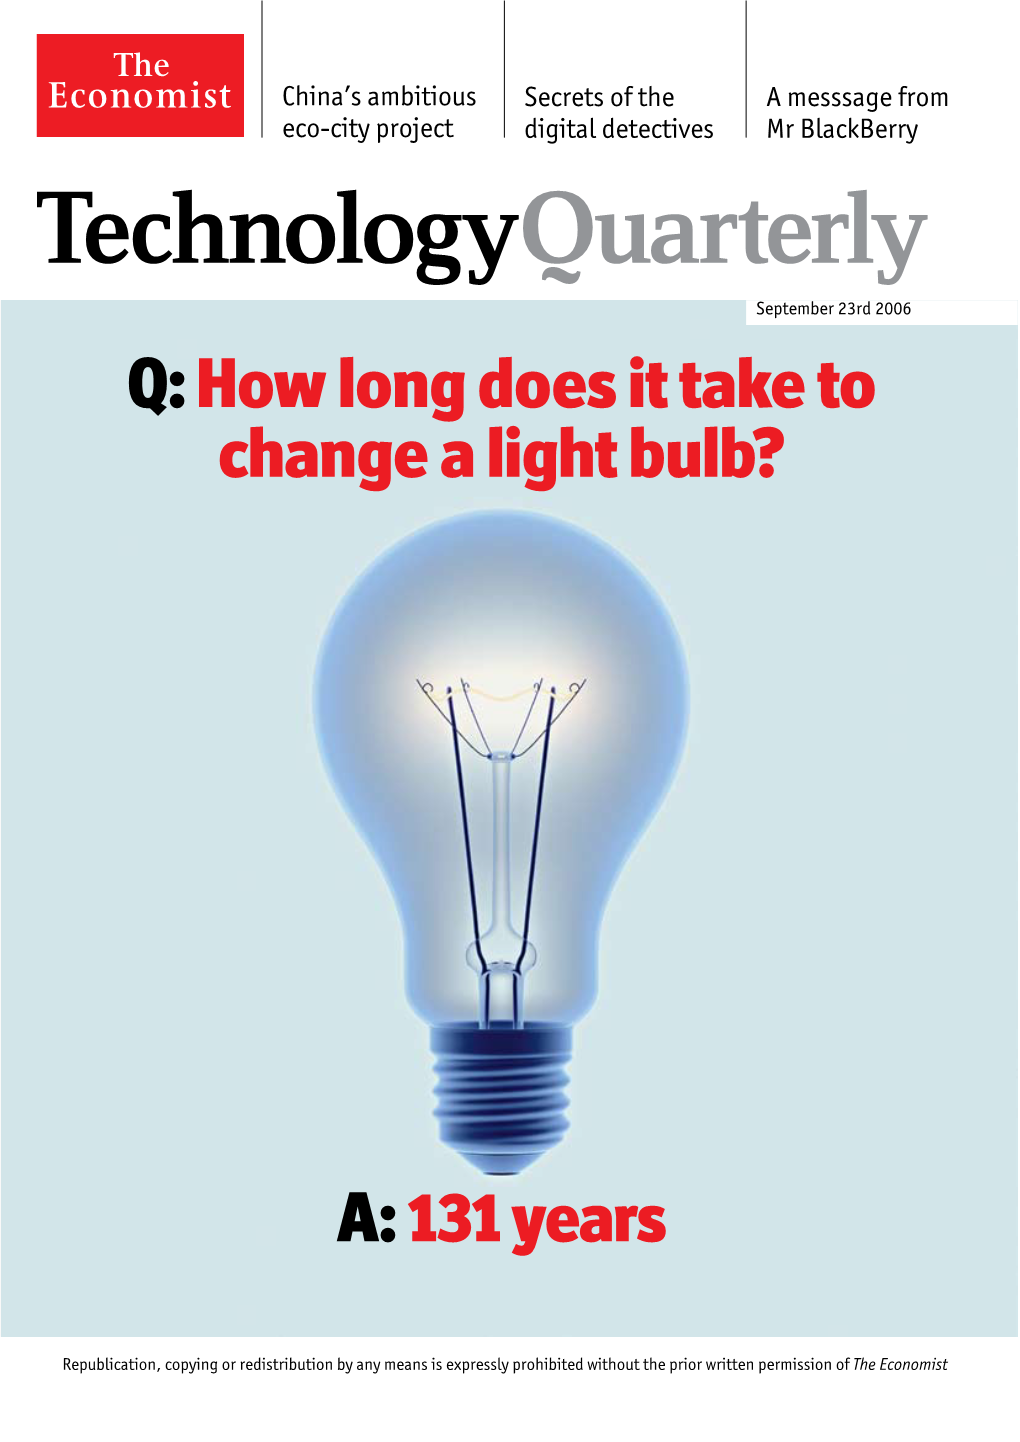 Technologyquarterly September 23Rd 2006 Q: How Long Does It Take to Change a Light Bulb?